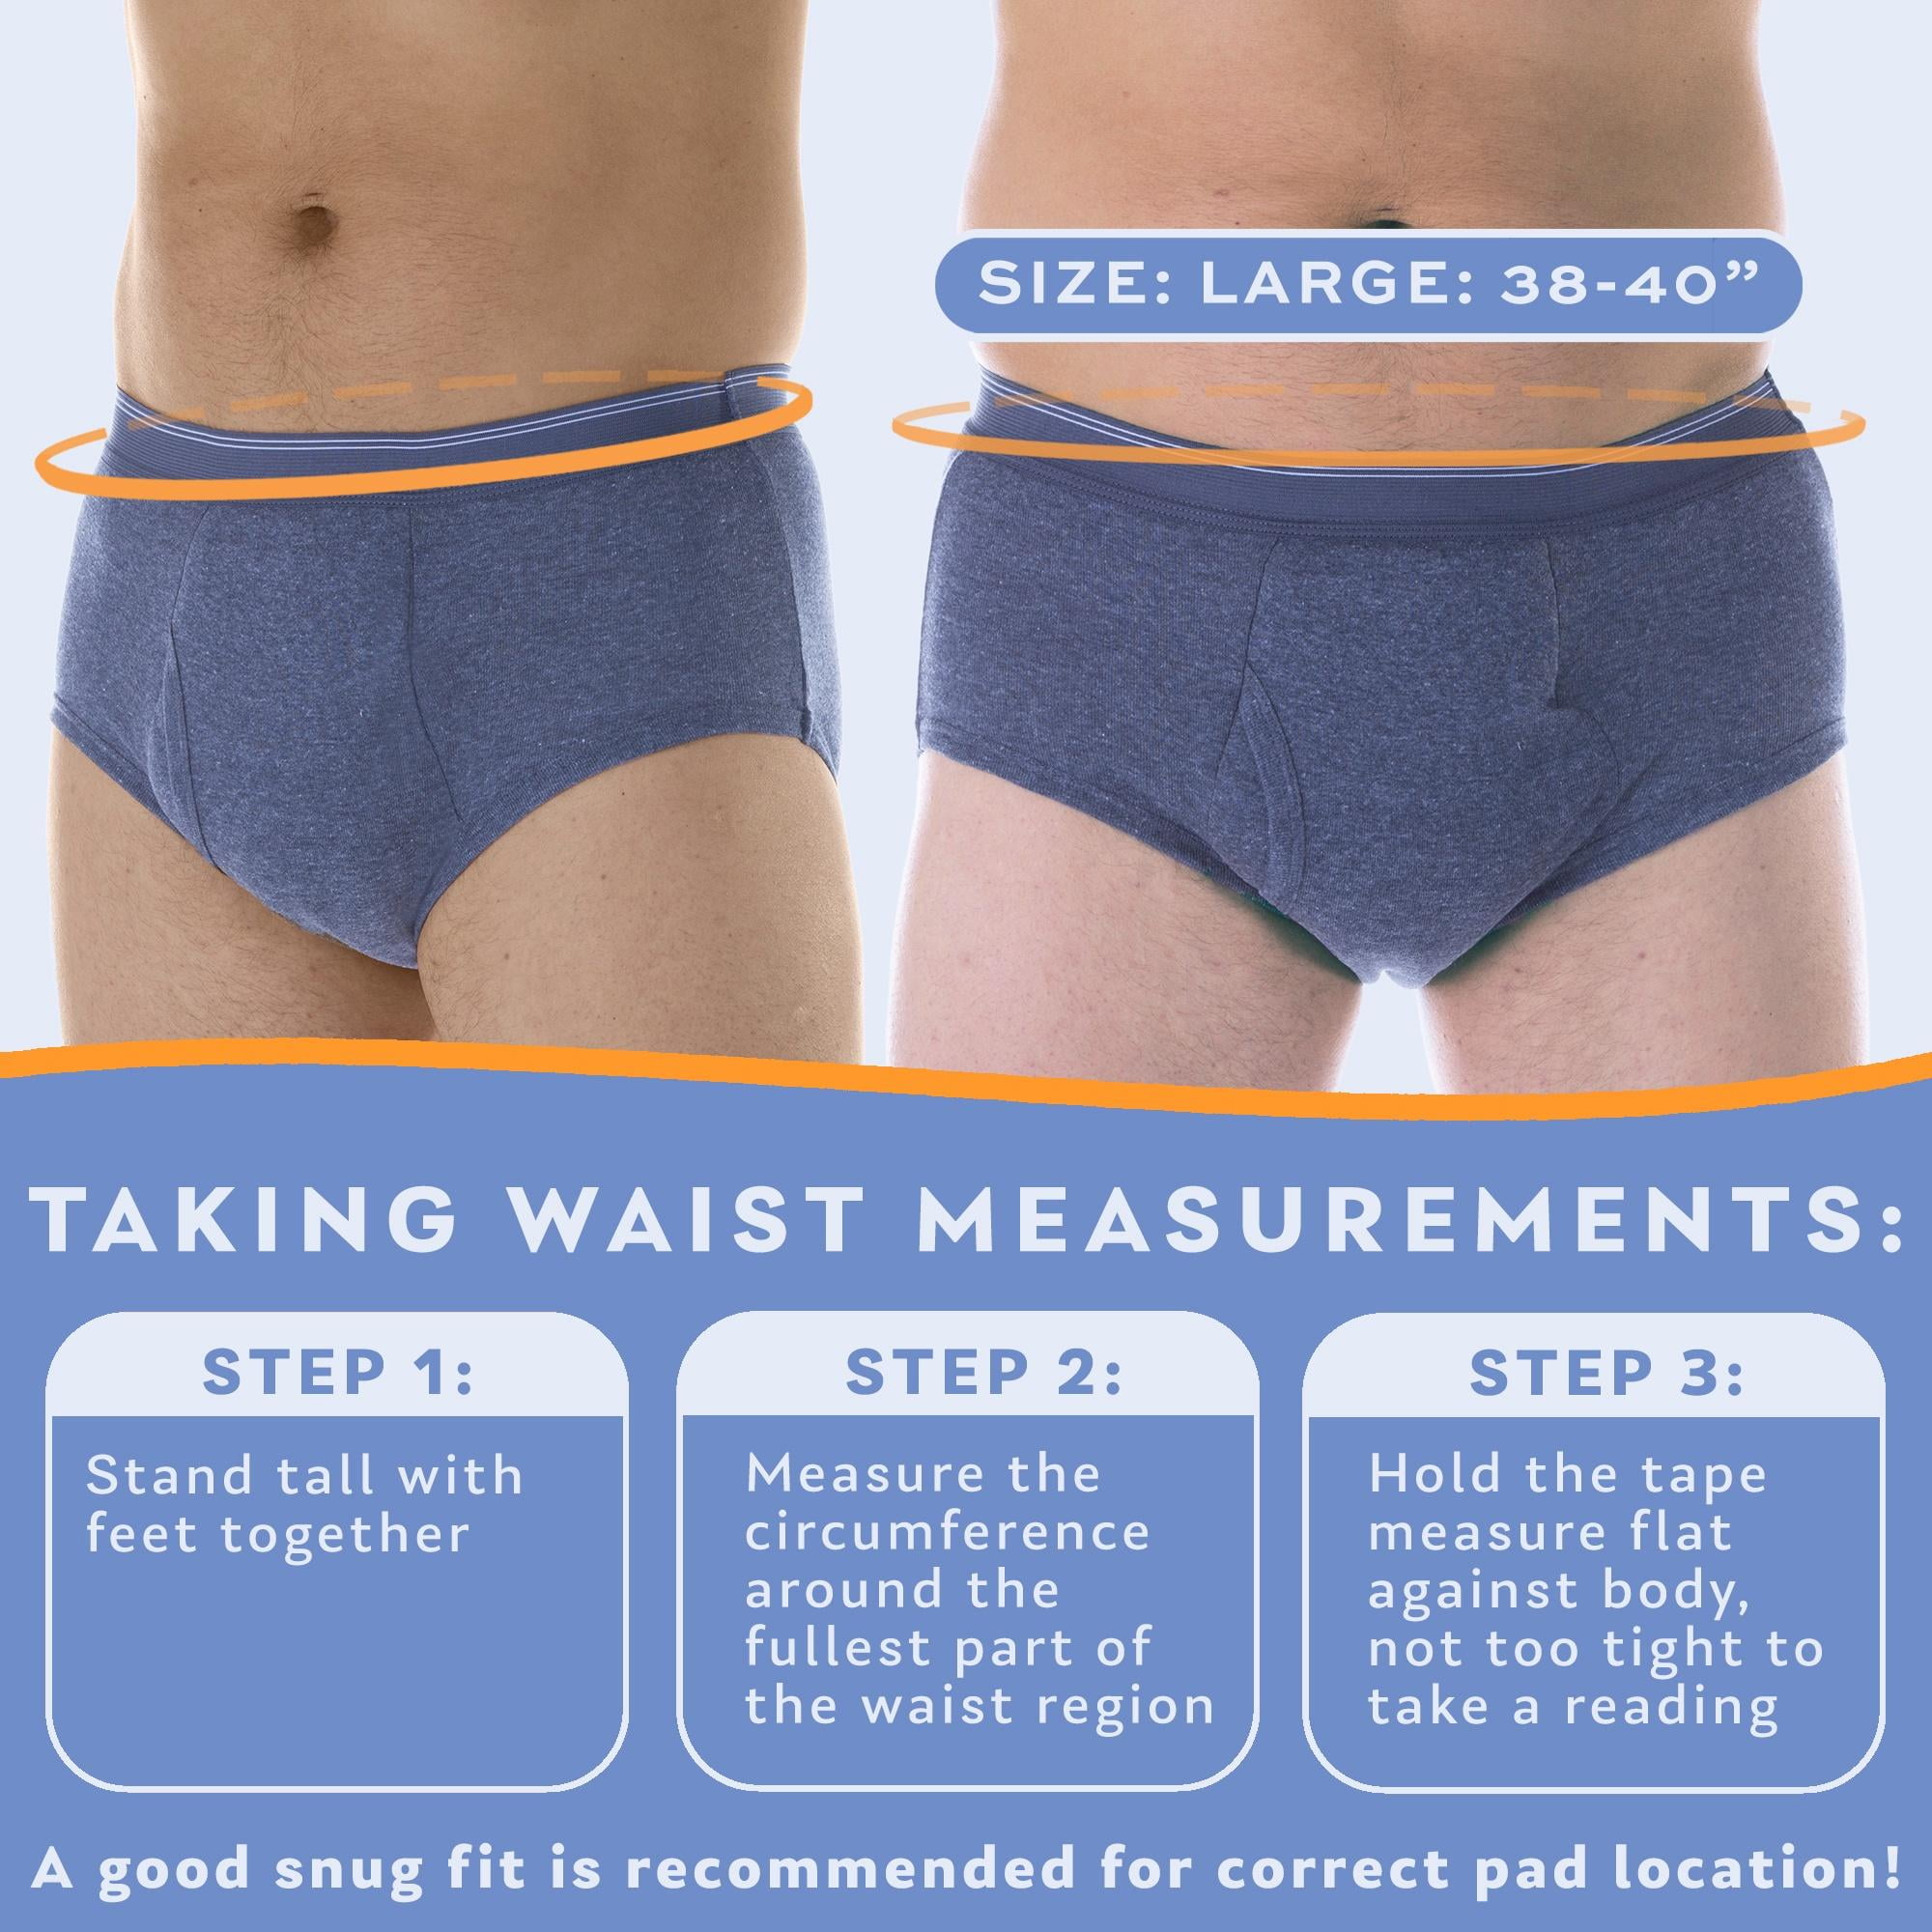  Wearever Men's Incontinence H-Fly Boxer Brief for Bladder  Control with Maximum Absorbency - Reusable & Washable Leak Proof Underwear  for Men (Single Pair) (Navy) (Large) (Waist 38-40) : Health & Household